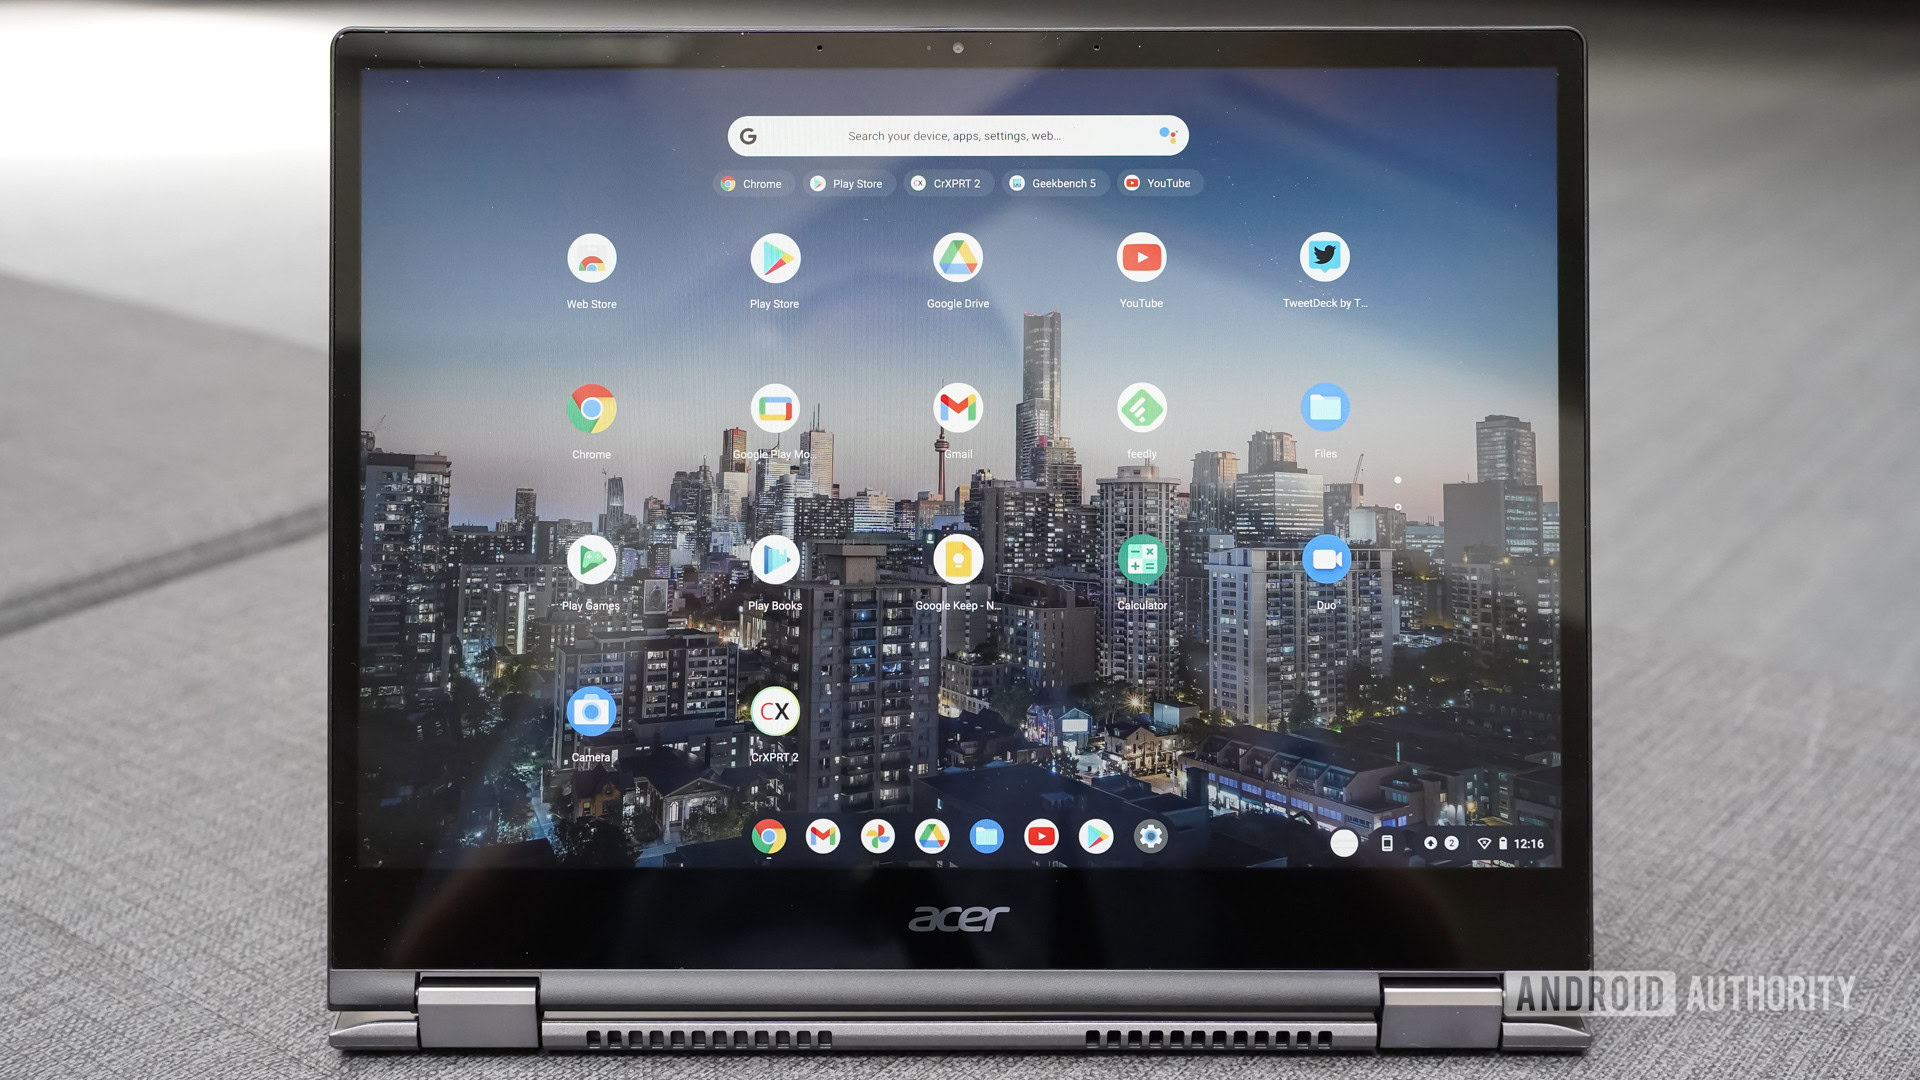 The Acer Chromebook Spin 713 display.